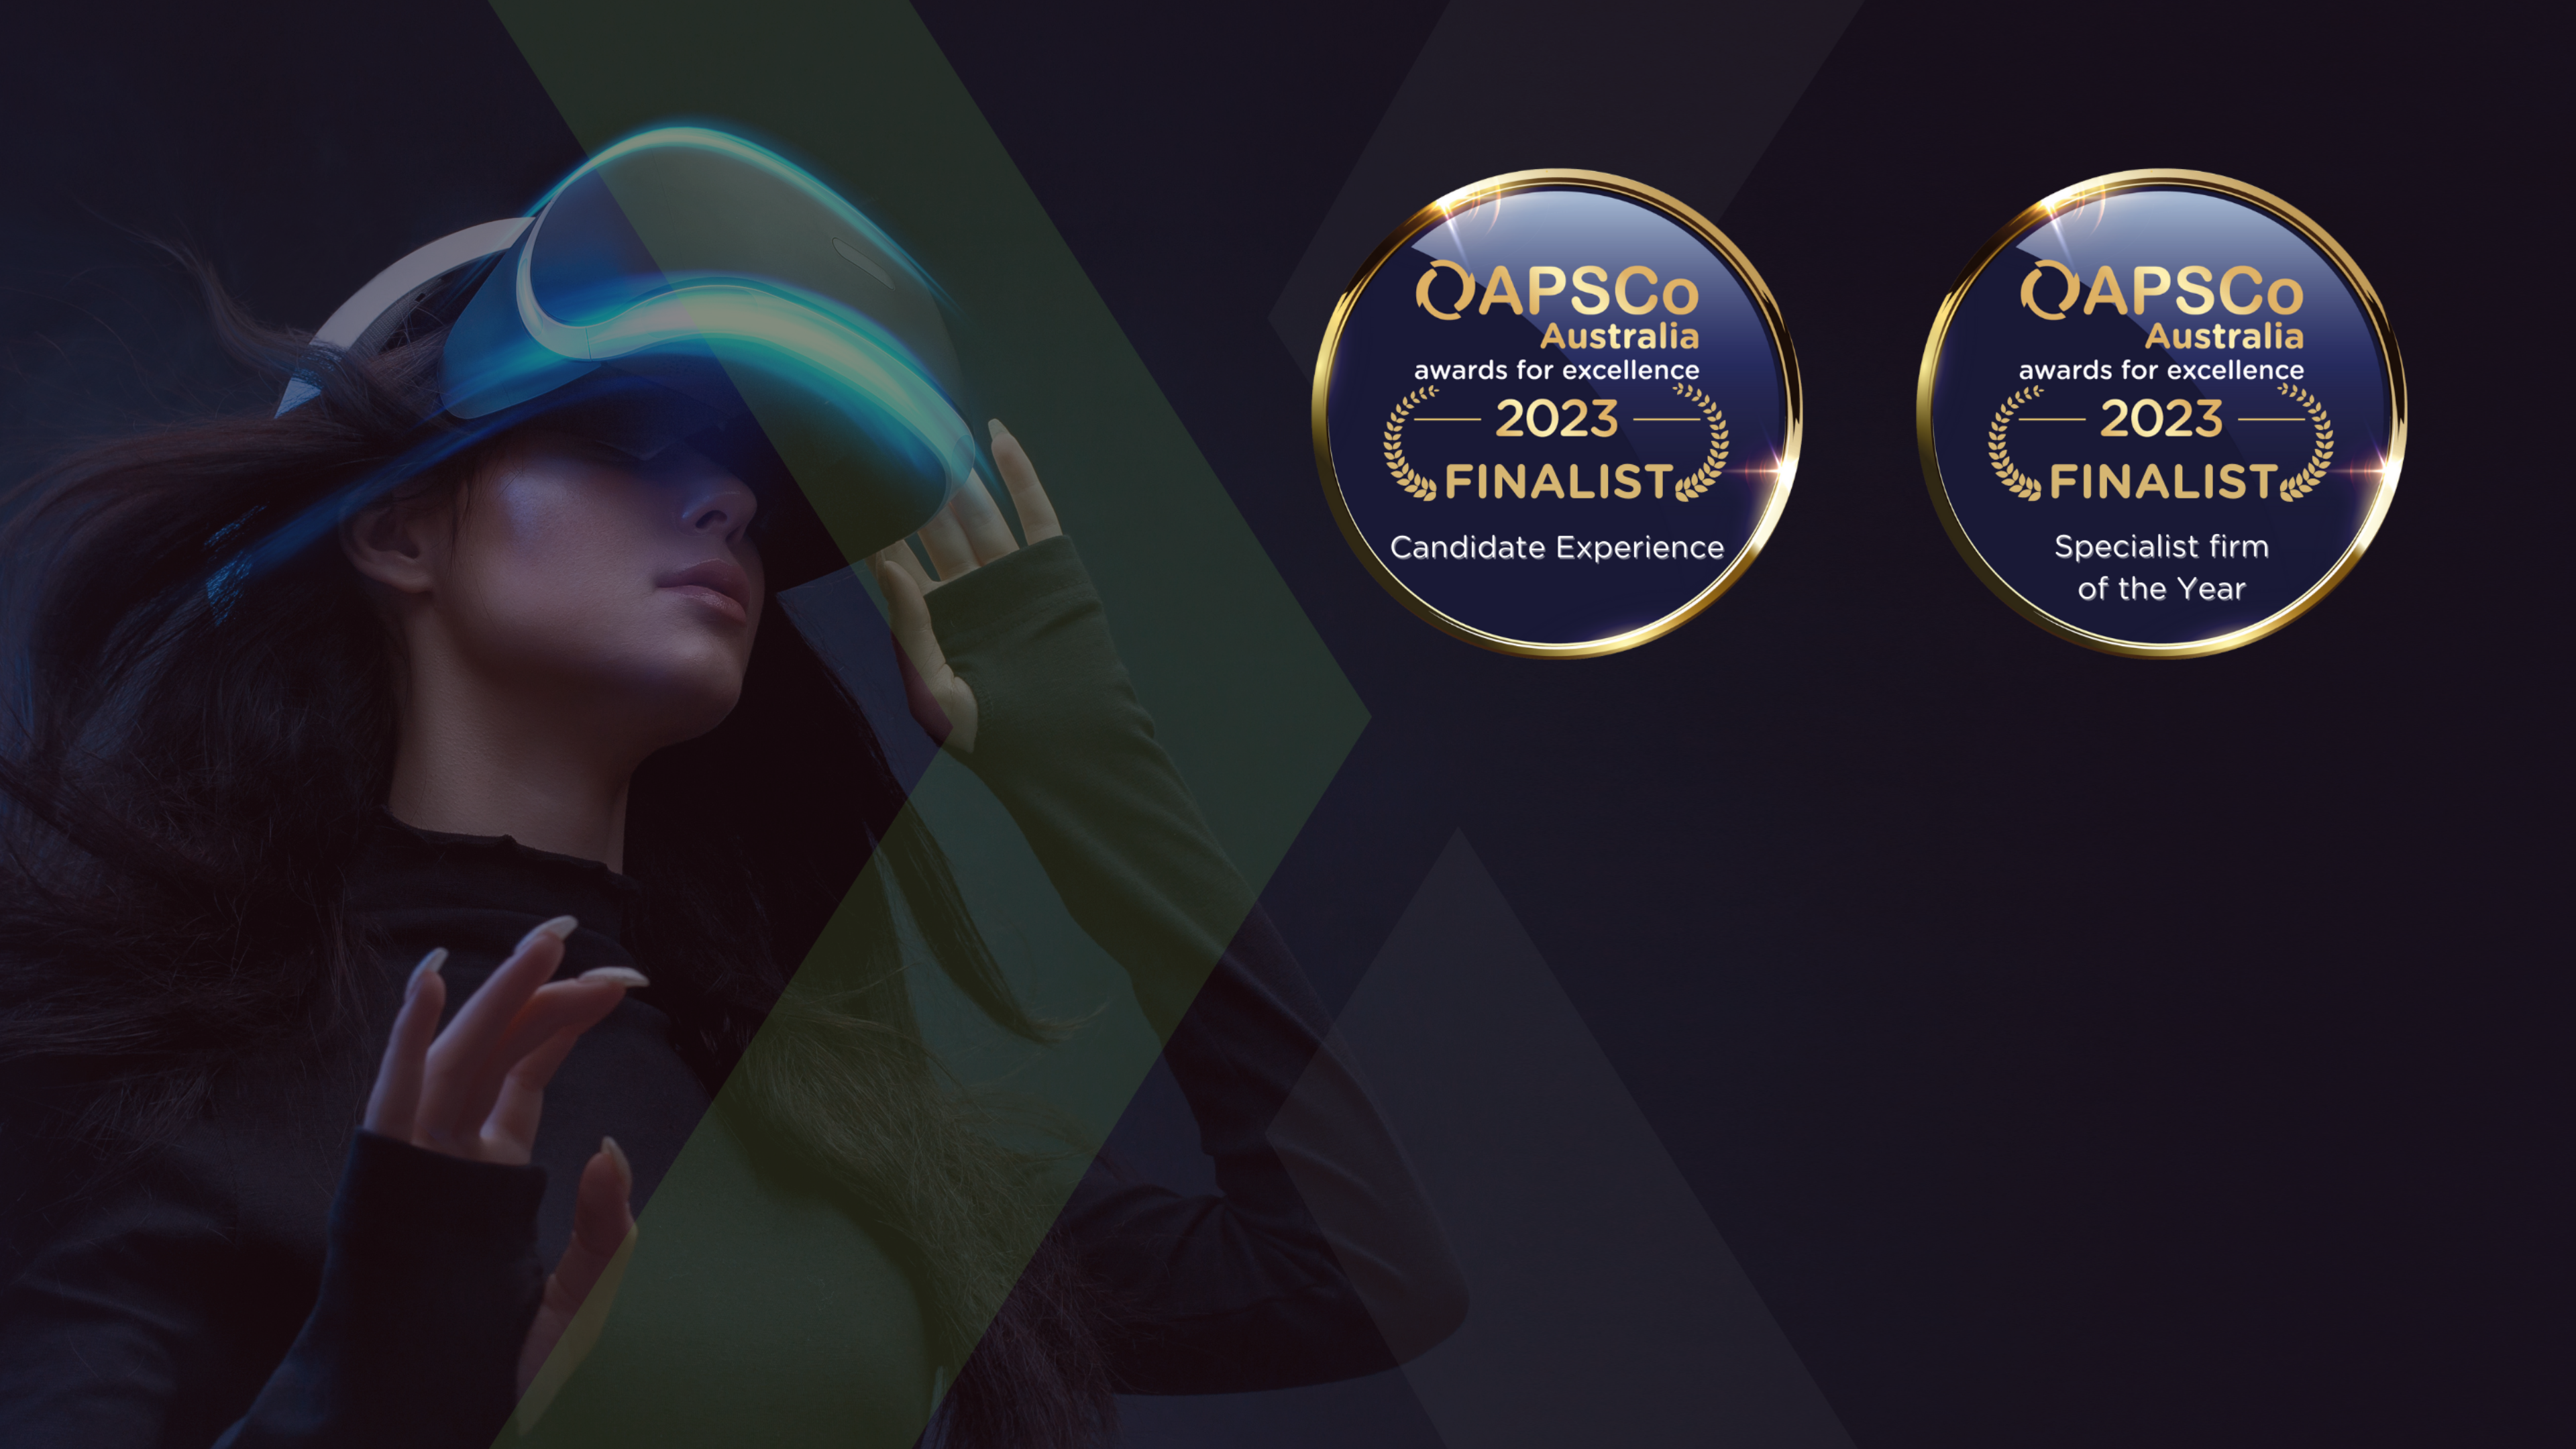 A person immersed in a virtual reality experience, flanked by two award emblems for excellence in candidate experience and specialist firm categories.